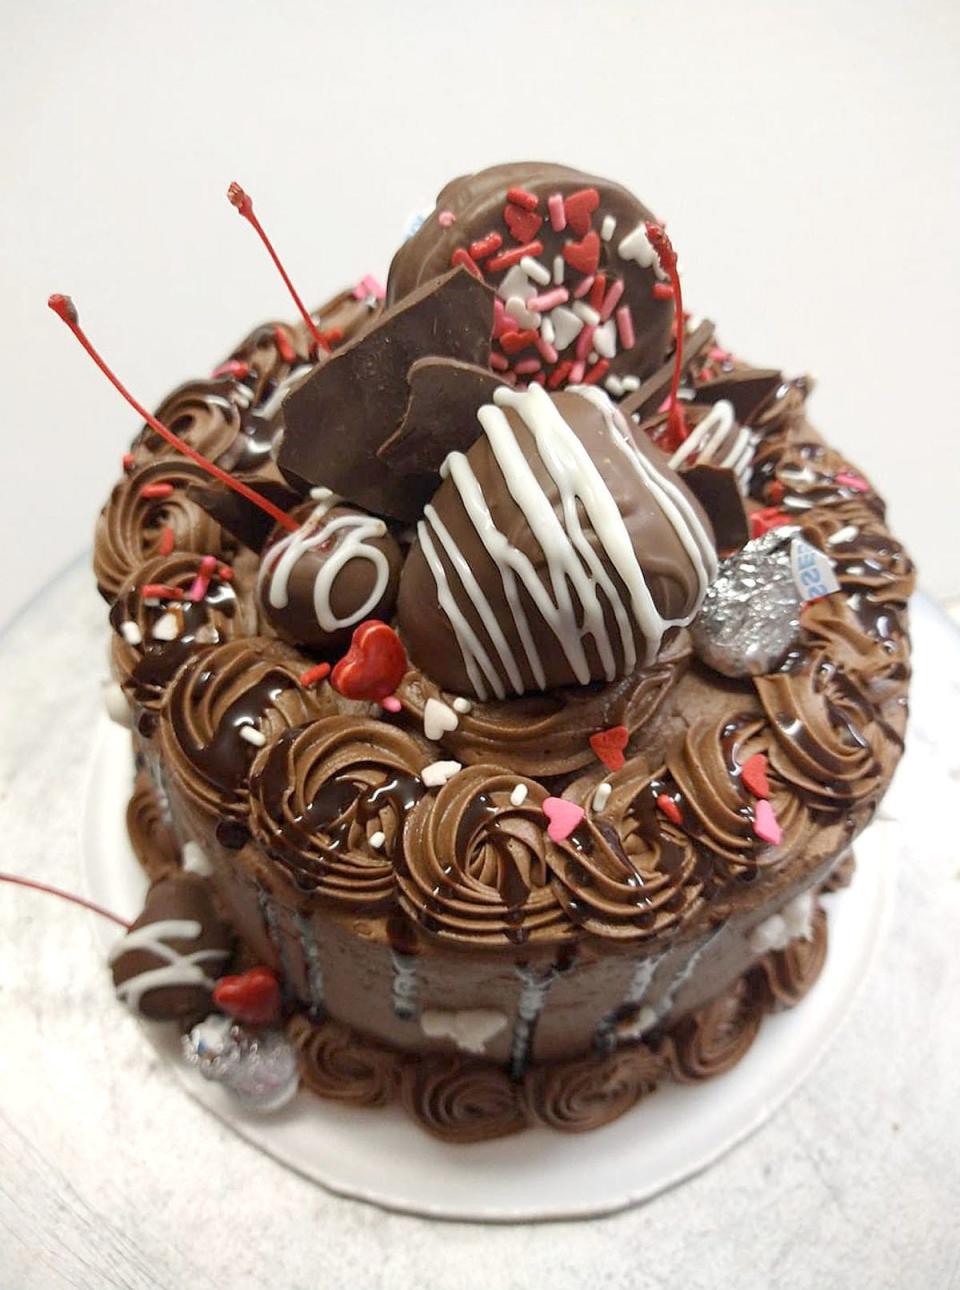 Both Cakery locations were ready for Valentine's Day last week with preordered cakes like this one.